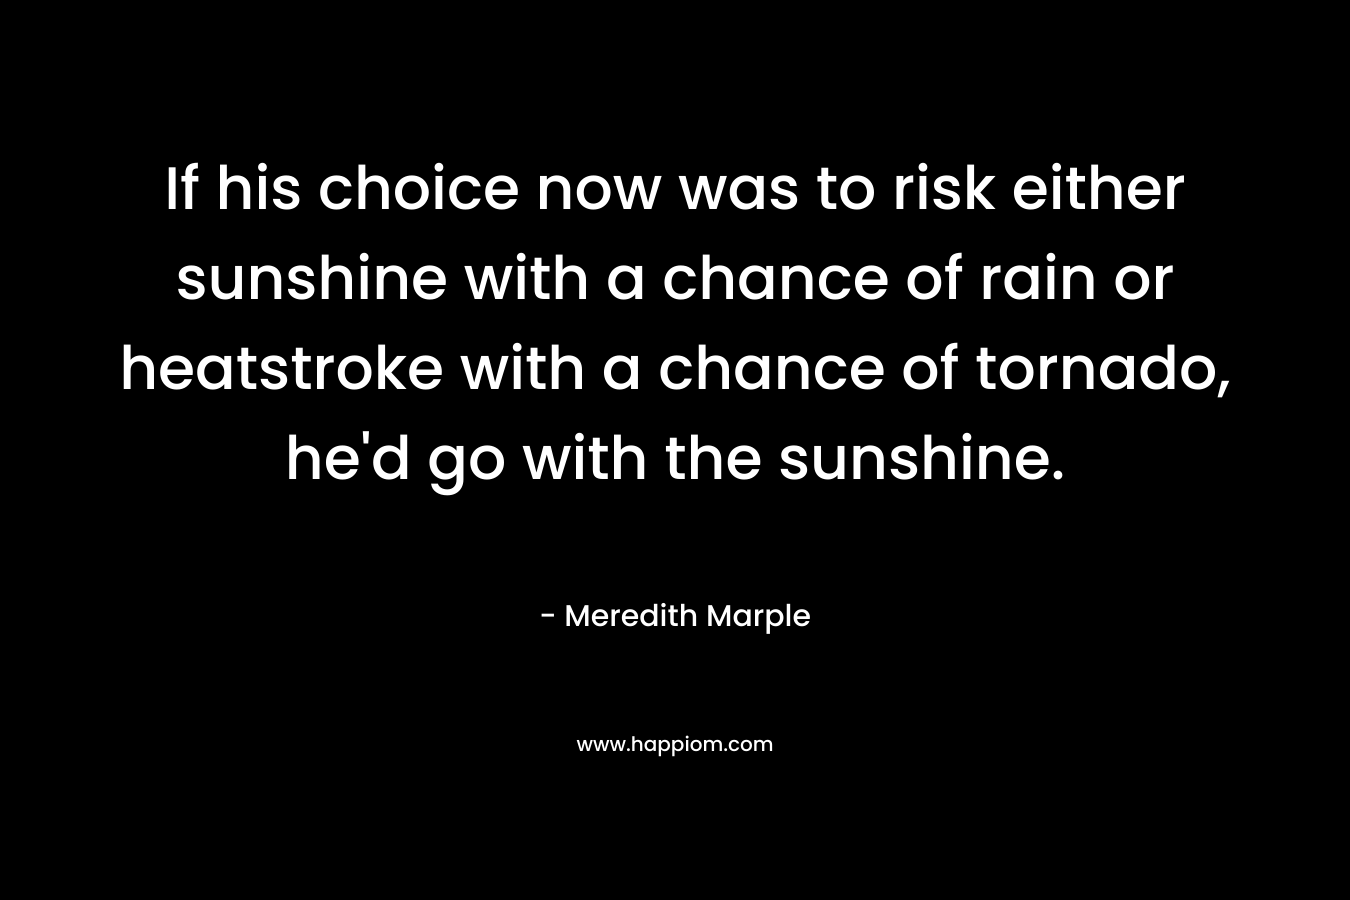 If his choice now was to risk either sunshine with a chance of rain or heatstroke with a chance of tornado, he'd go with the sunshine.